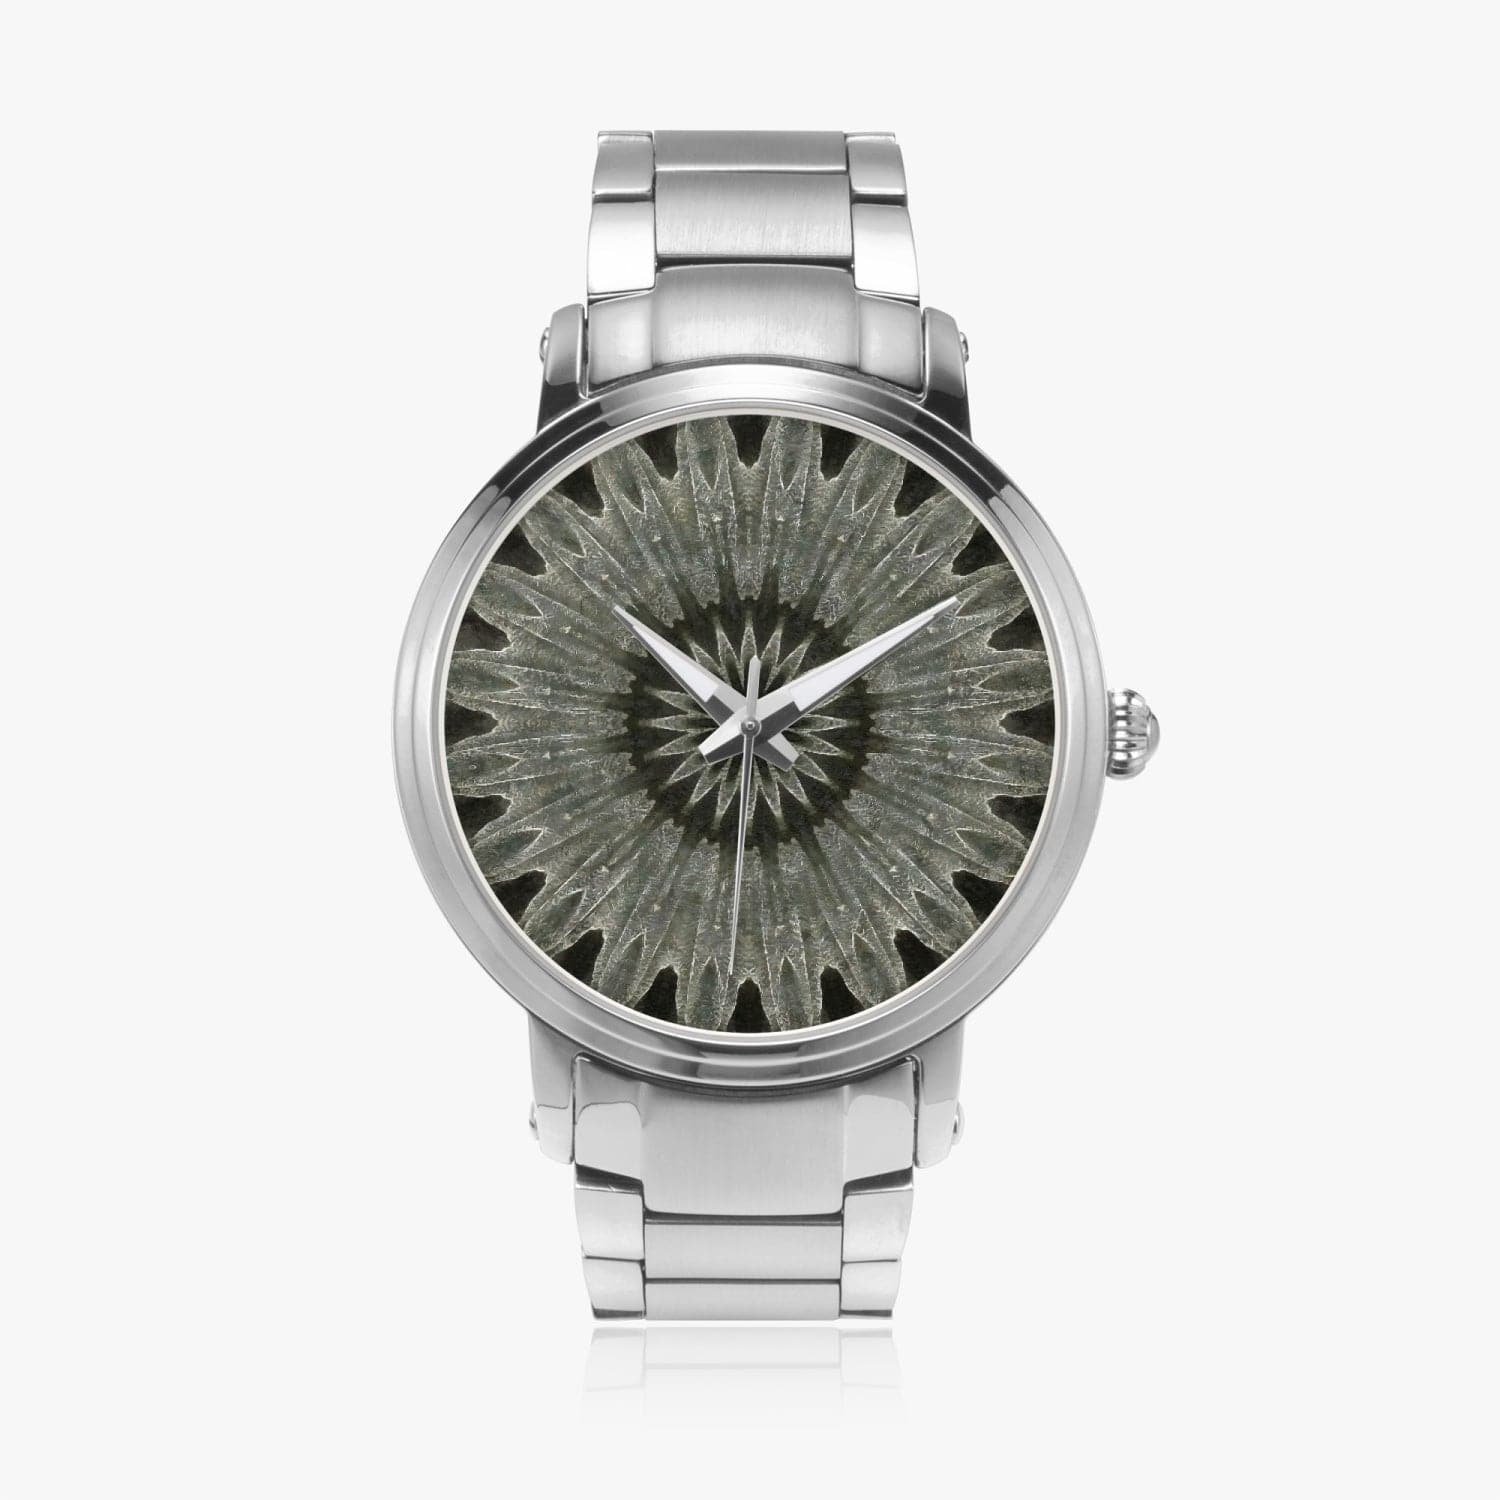 'Flax Structure 5' Steel Strap Automatic Watch at Sensus Studio